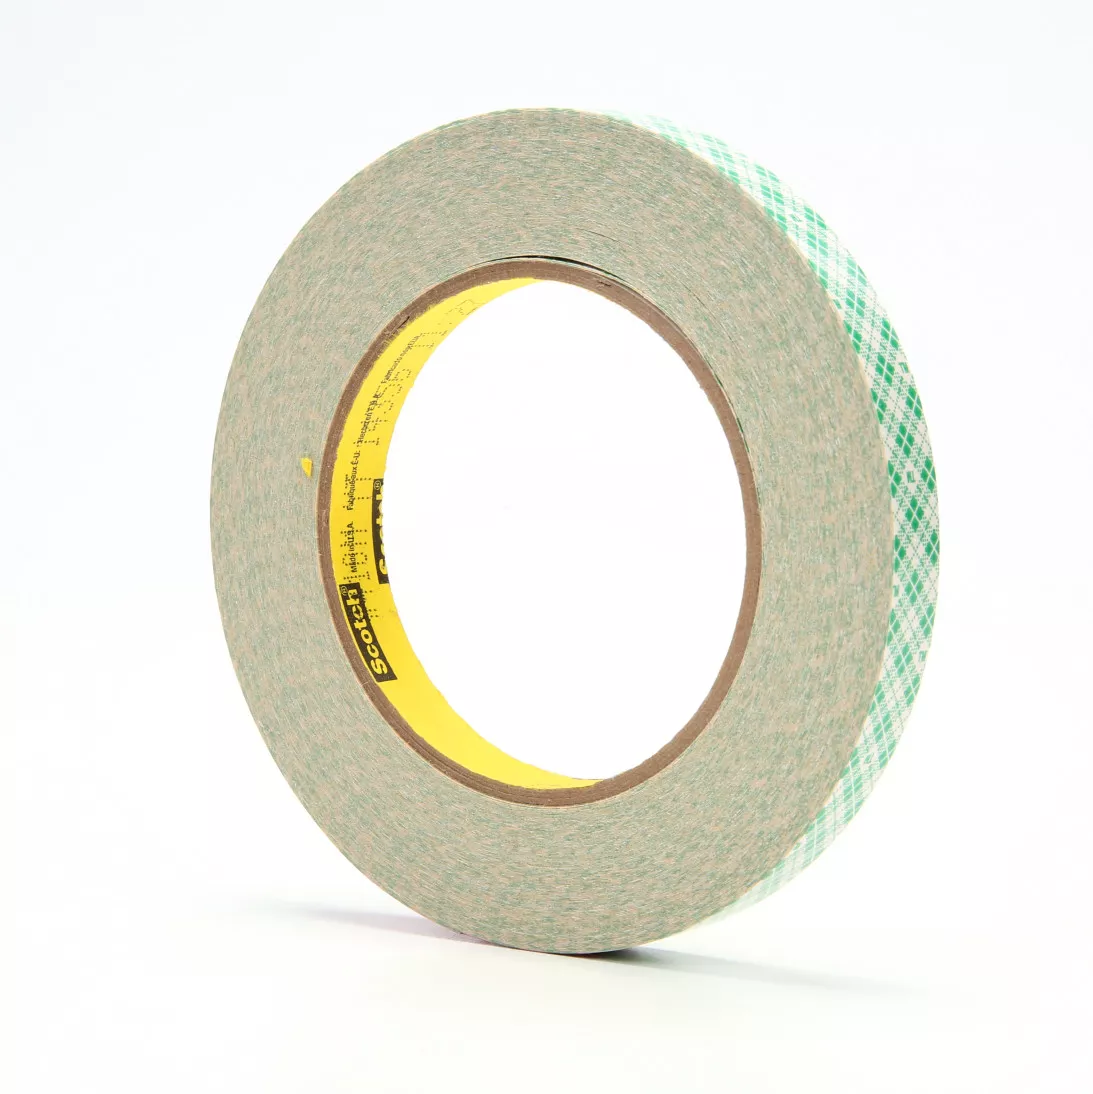 3M™ Double Coated Paper Tape 410M, Natural, 1/2 in x 36 yd, 5 mil, 72
rolls per case